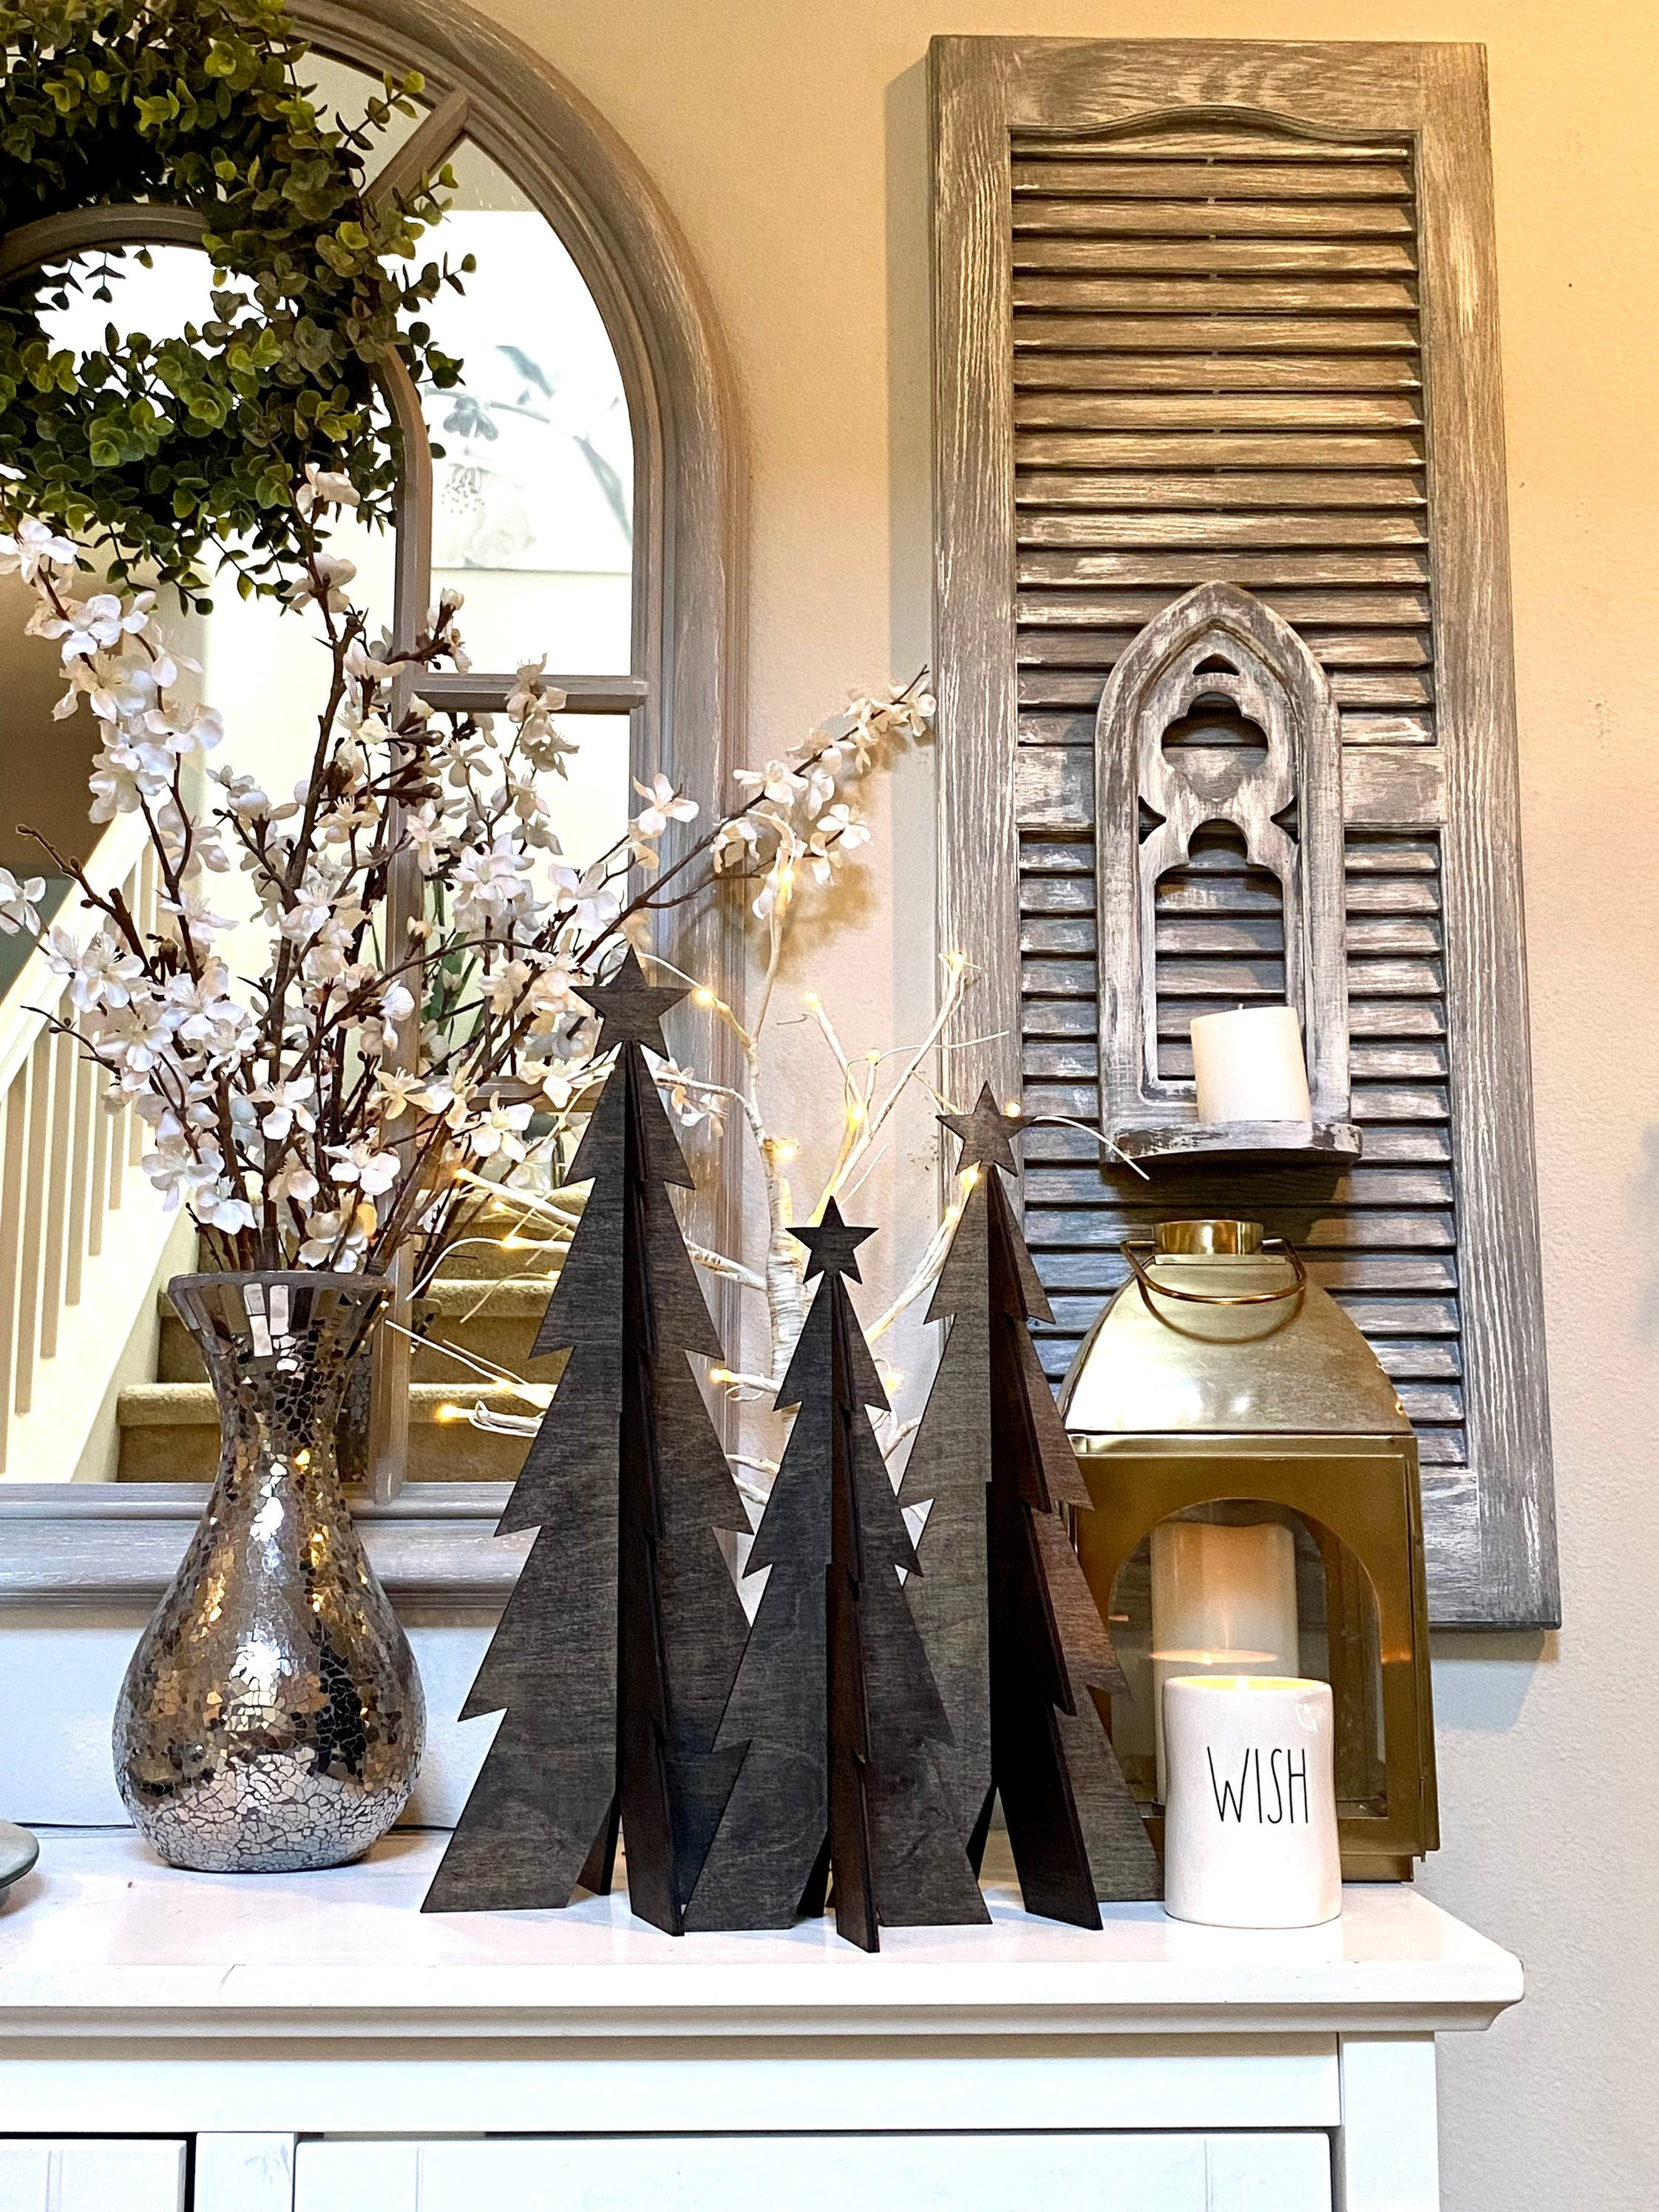 3 Christmas Trees Designed With Themes - Woodsy, Modern, and Farmhouse —  DESIGNED